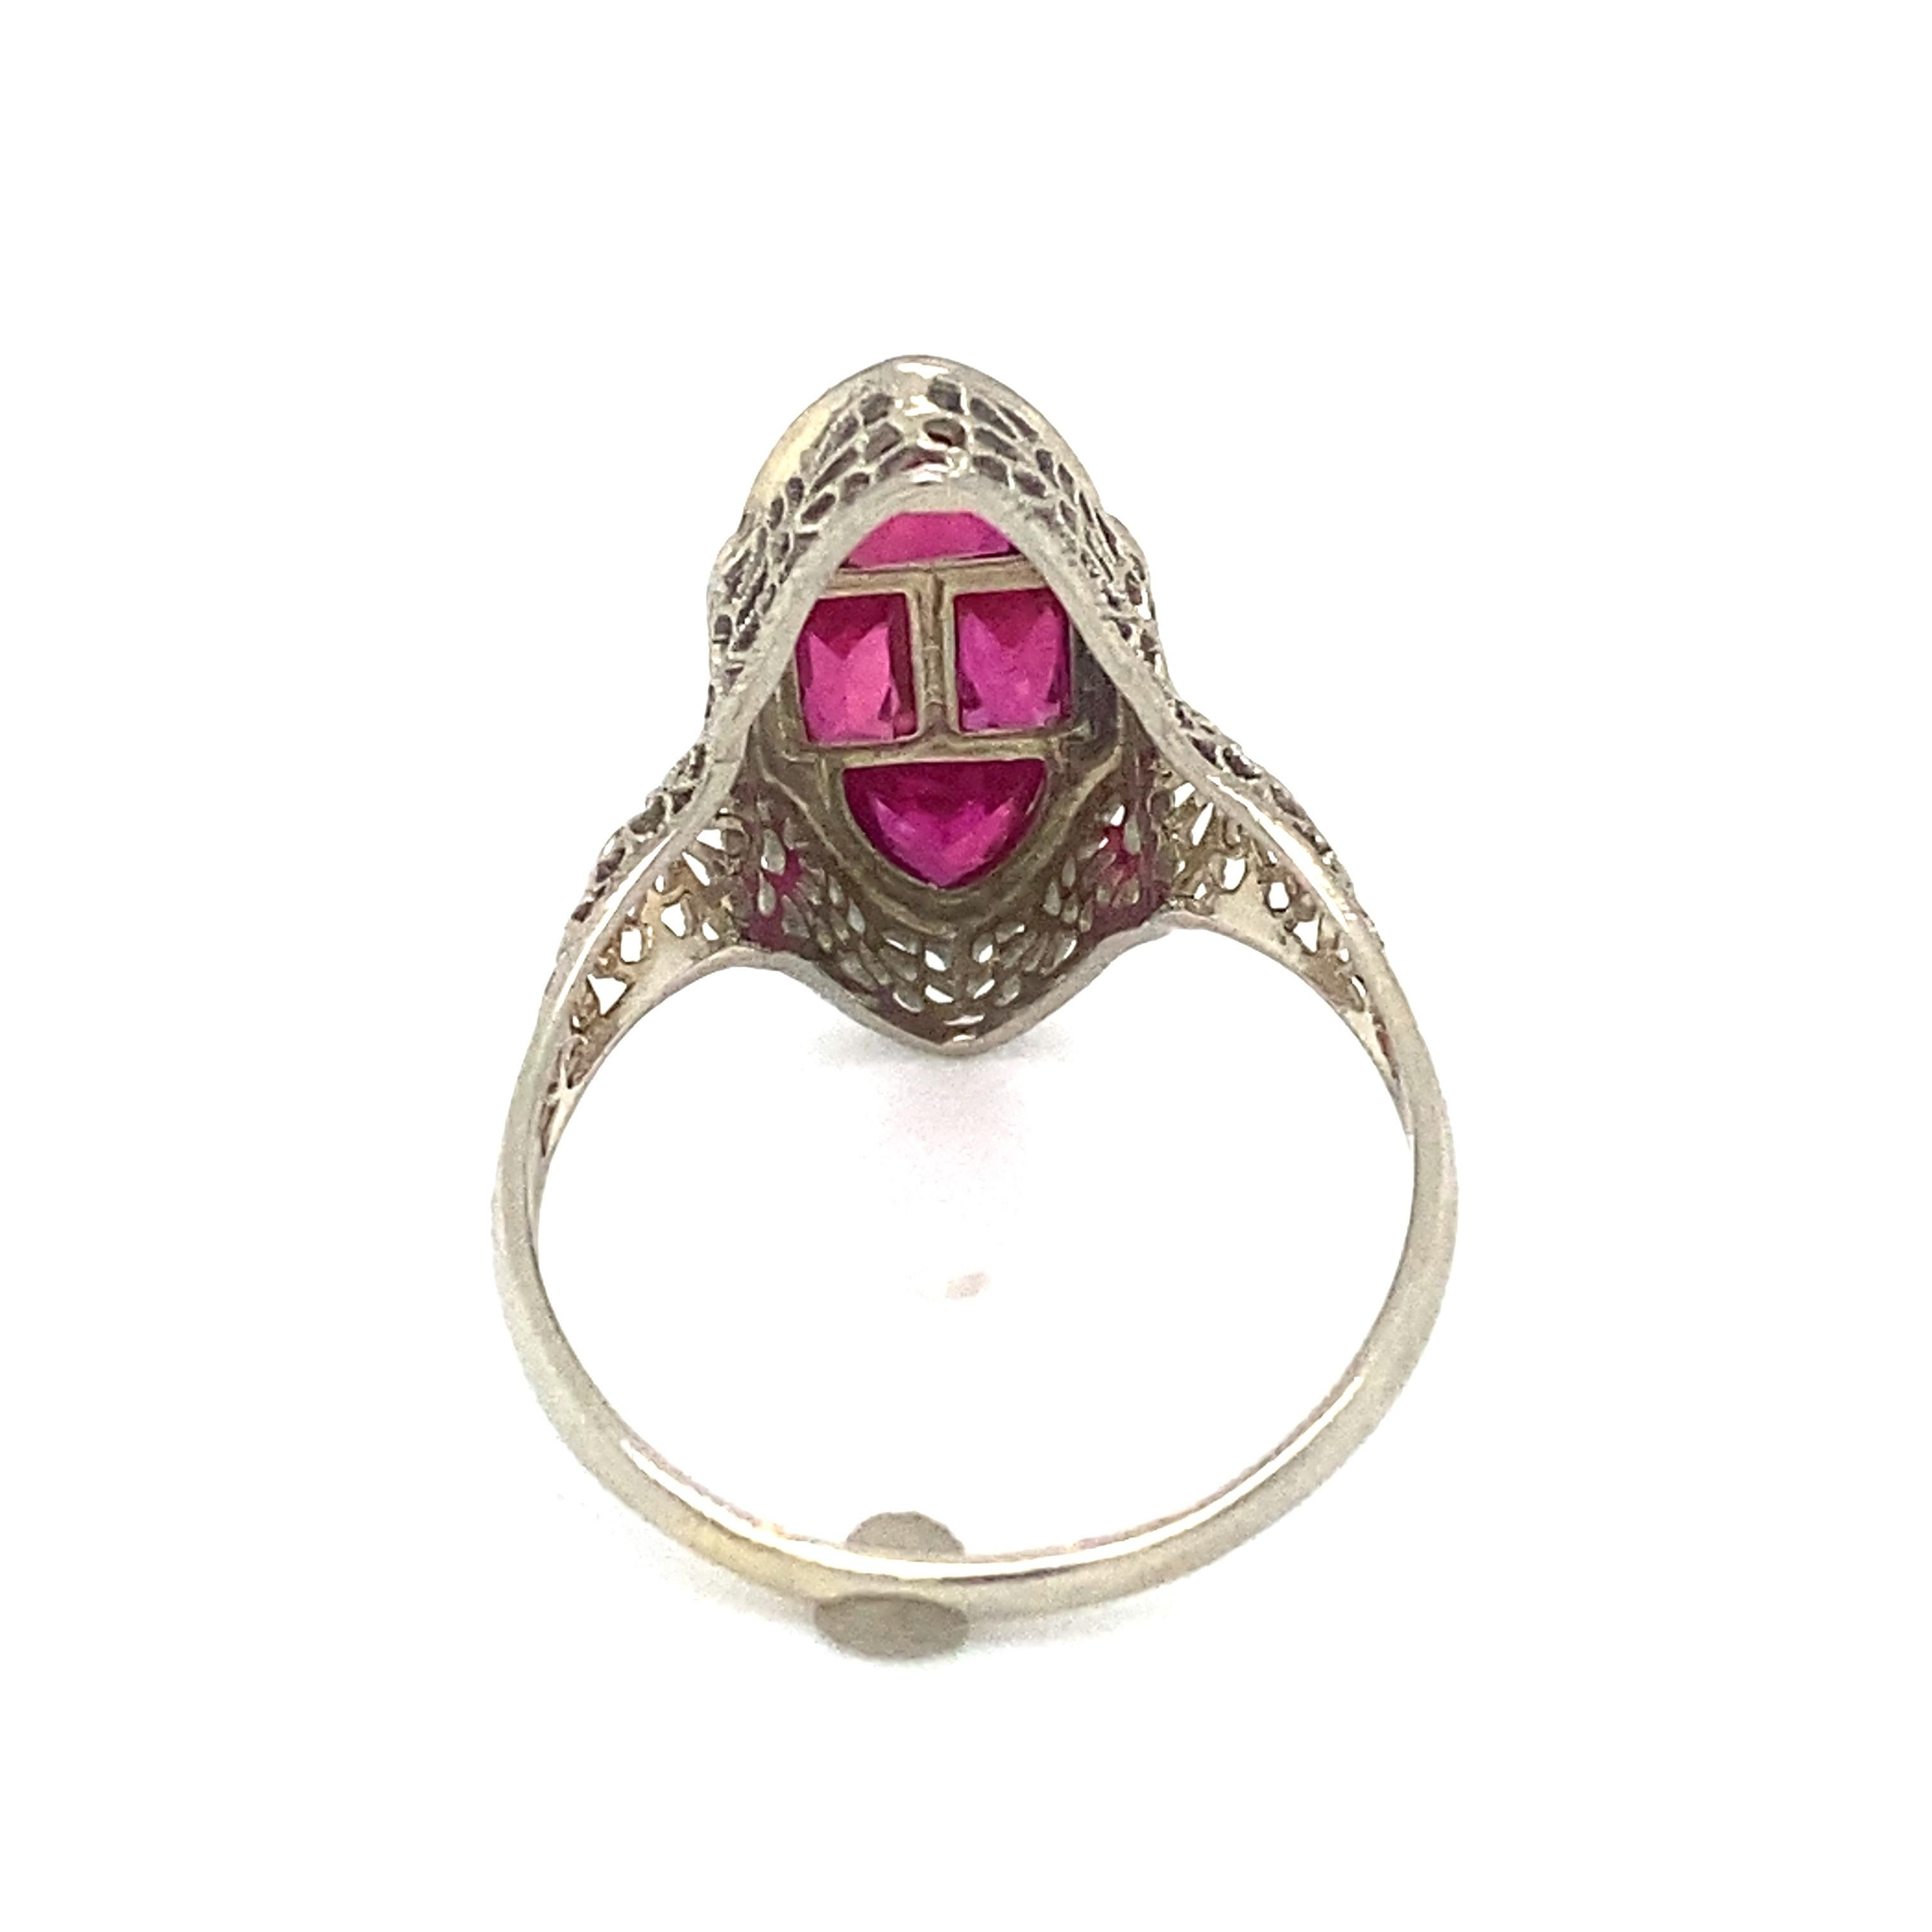 Item Details: This Art Deco ring features red glass ruby simulant in a geometric design.

Circa: 1920s
Metal Type: 14 Karat White Gold
Weight: 3.5 grams
Size: US 9.25, resizable